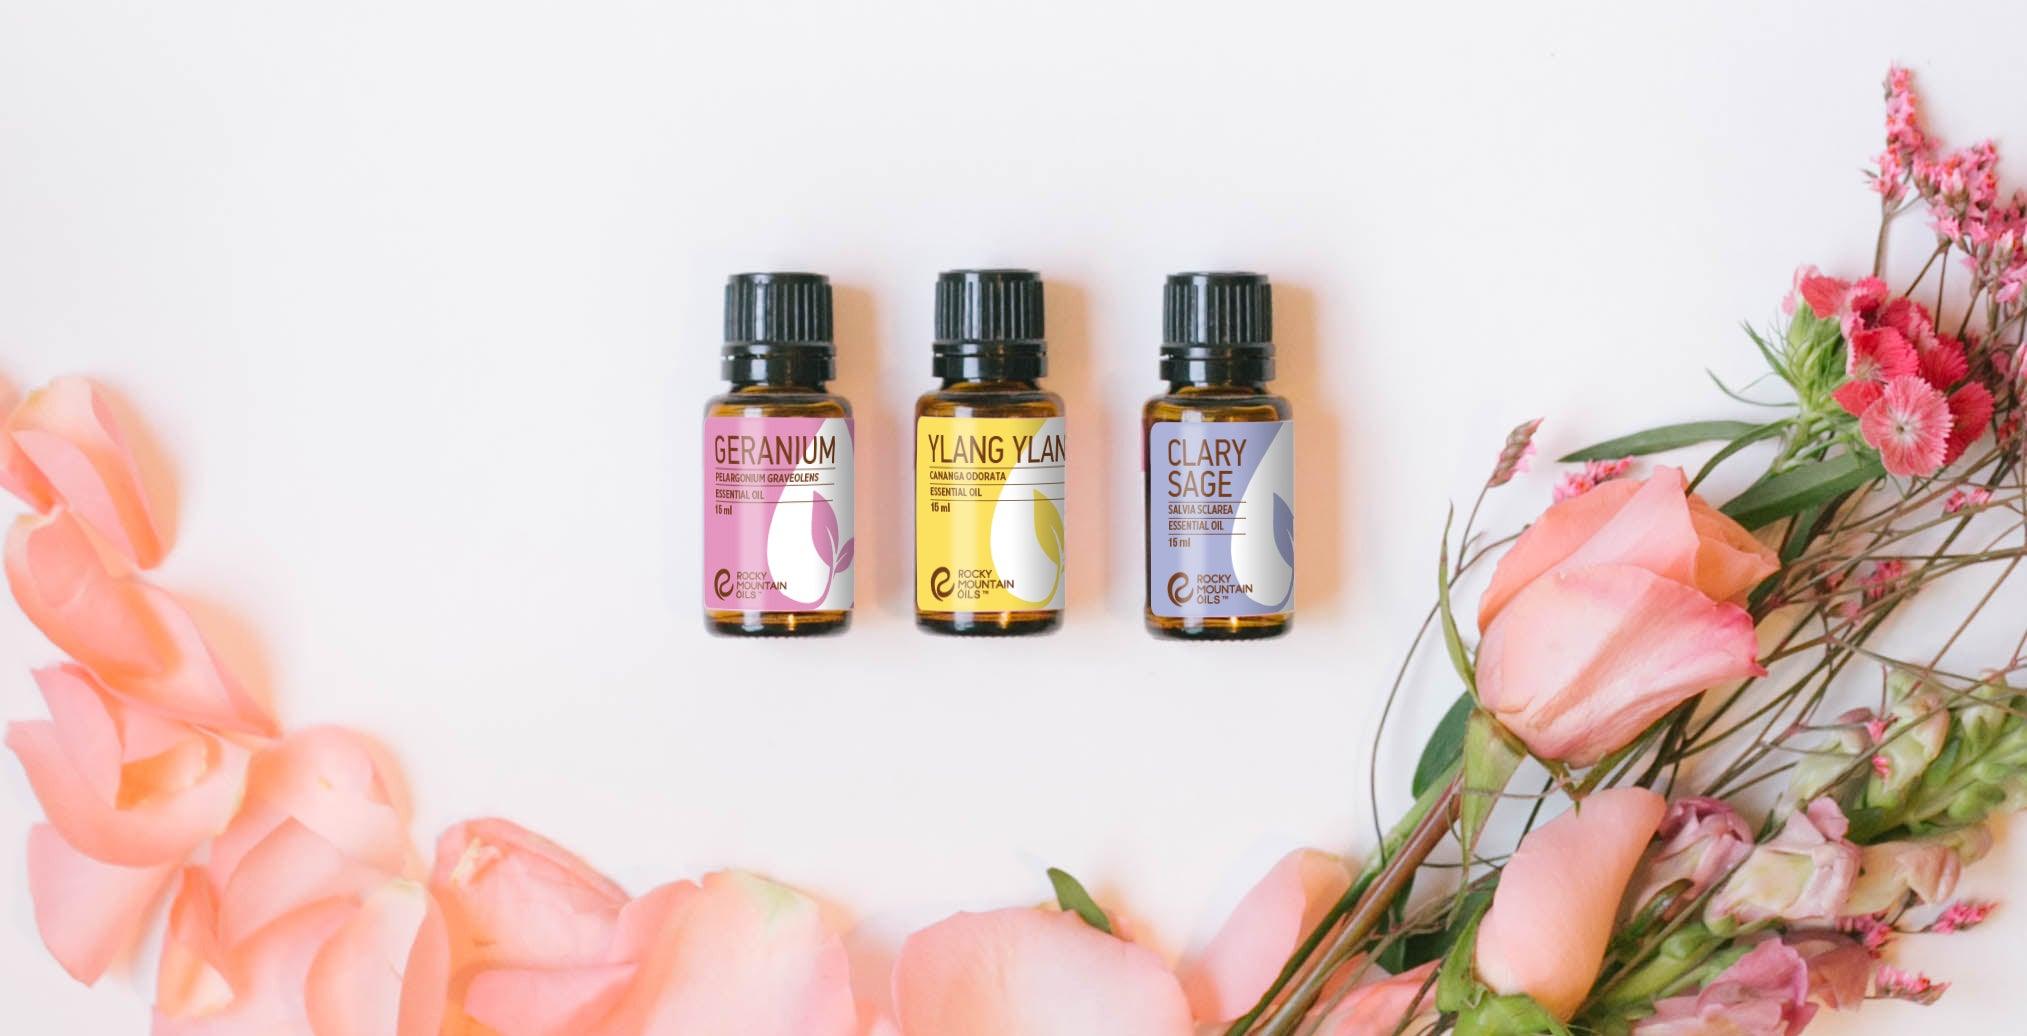  Top 8 Essential Oil Set 100% Pure Flower Essential Oil for  Aromatherapy (Jasmine, Rose, Chamomile, Lavender, Ylang-Ylang, Freesia,  Clove, Geranium) - 8 X 10ml : Everything Else